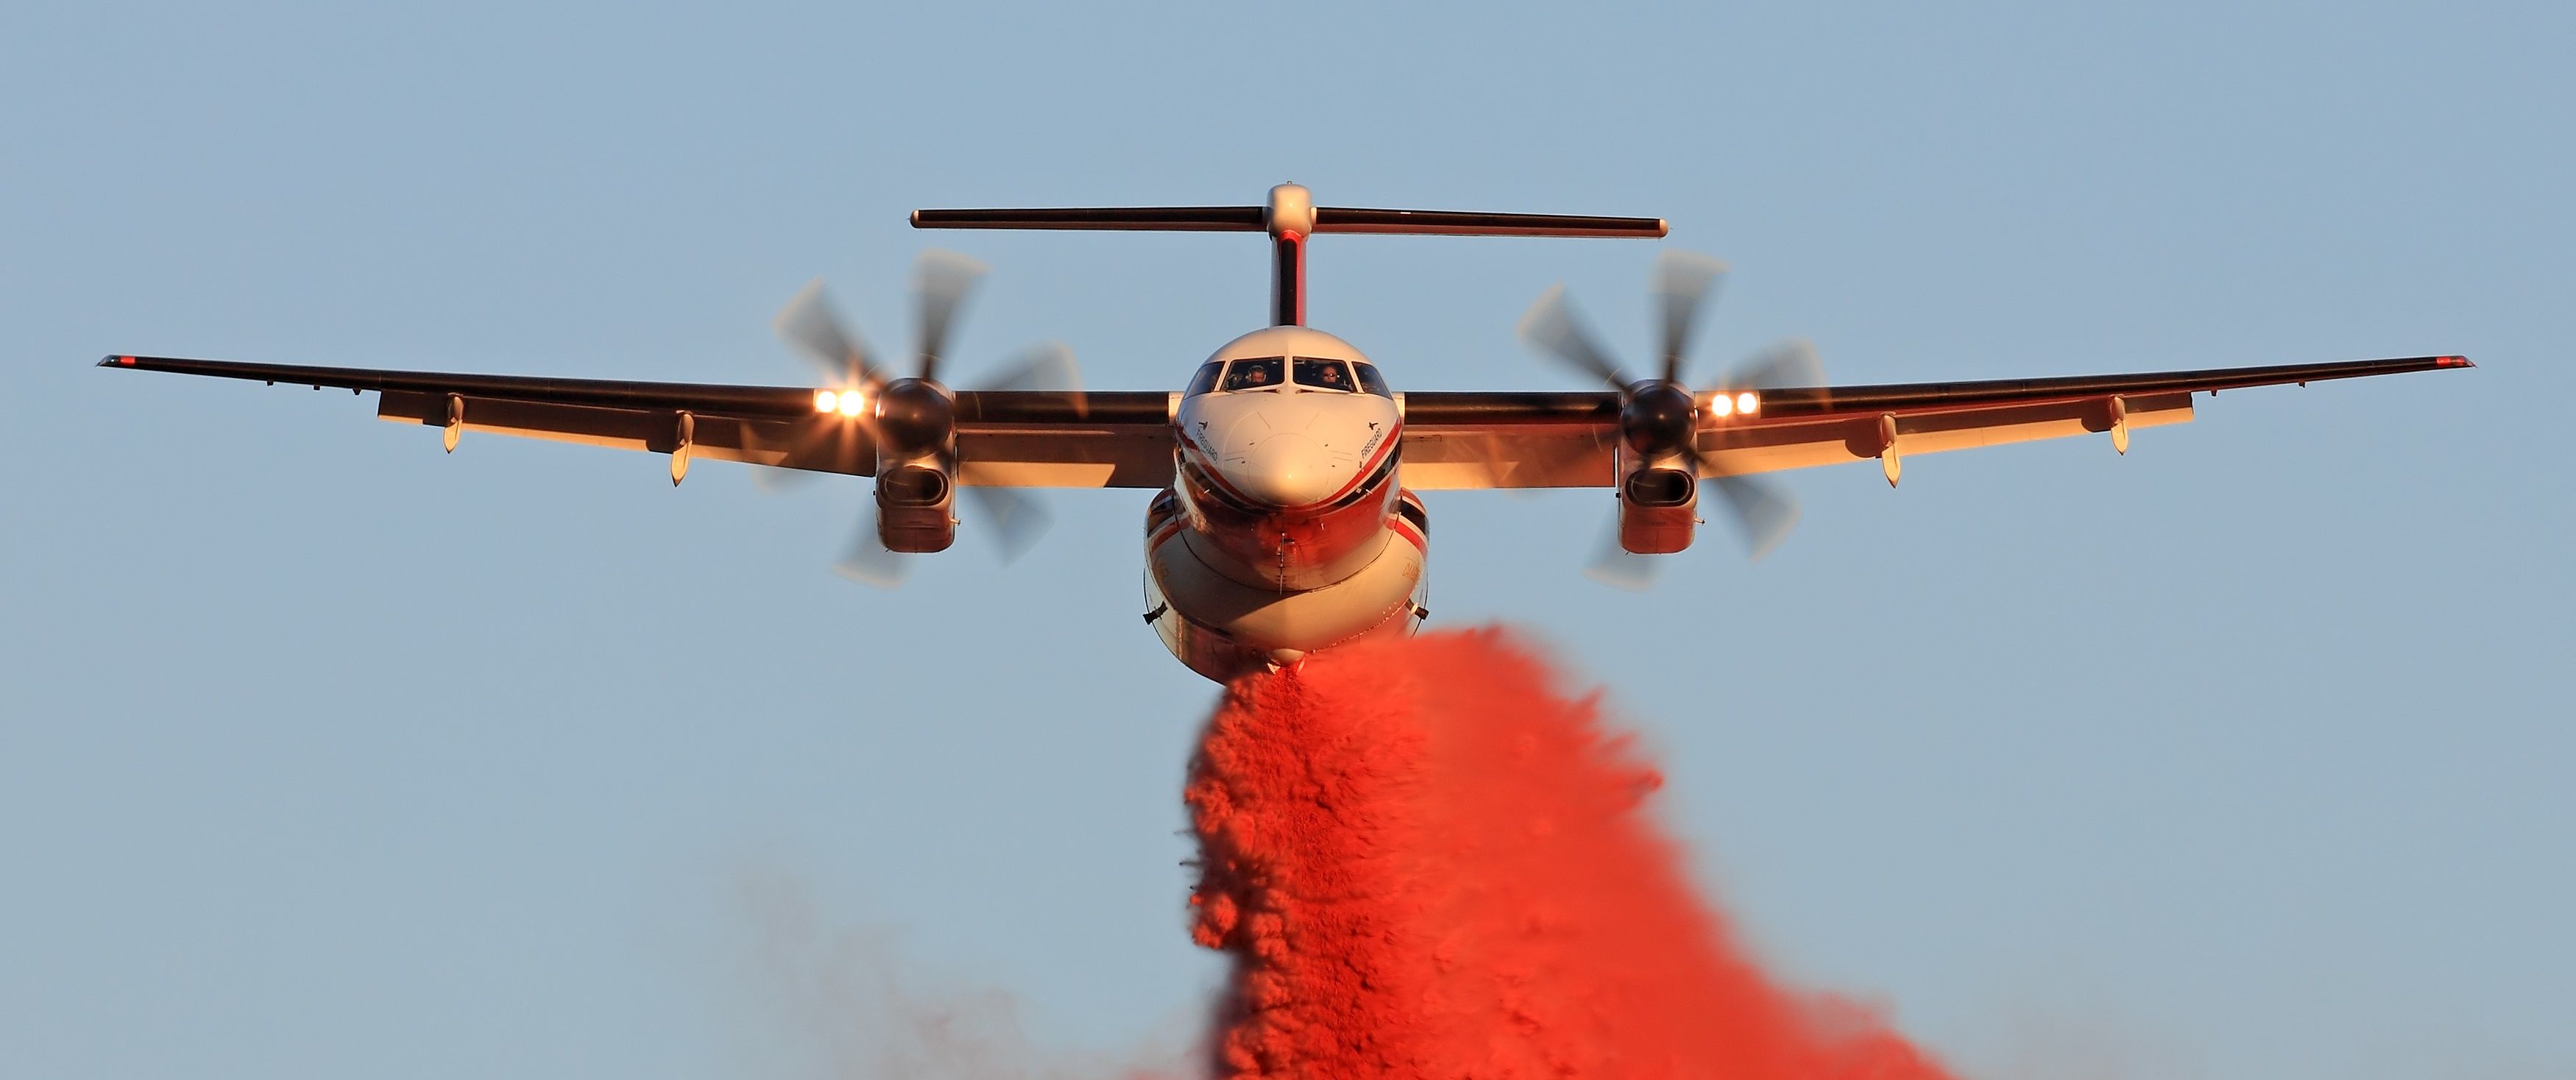 AERIAL FIREFIGHTING AND SEARCH & RESCUE RETURNS TO NîMES